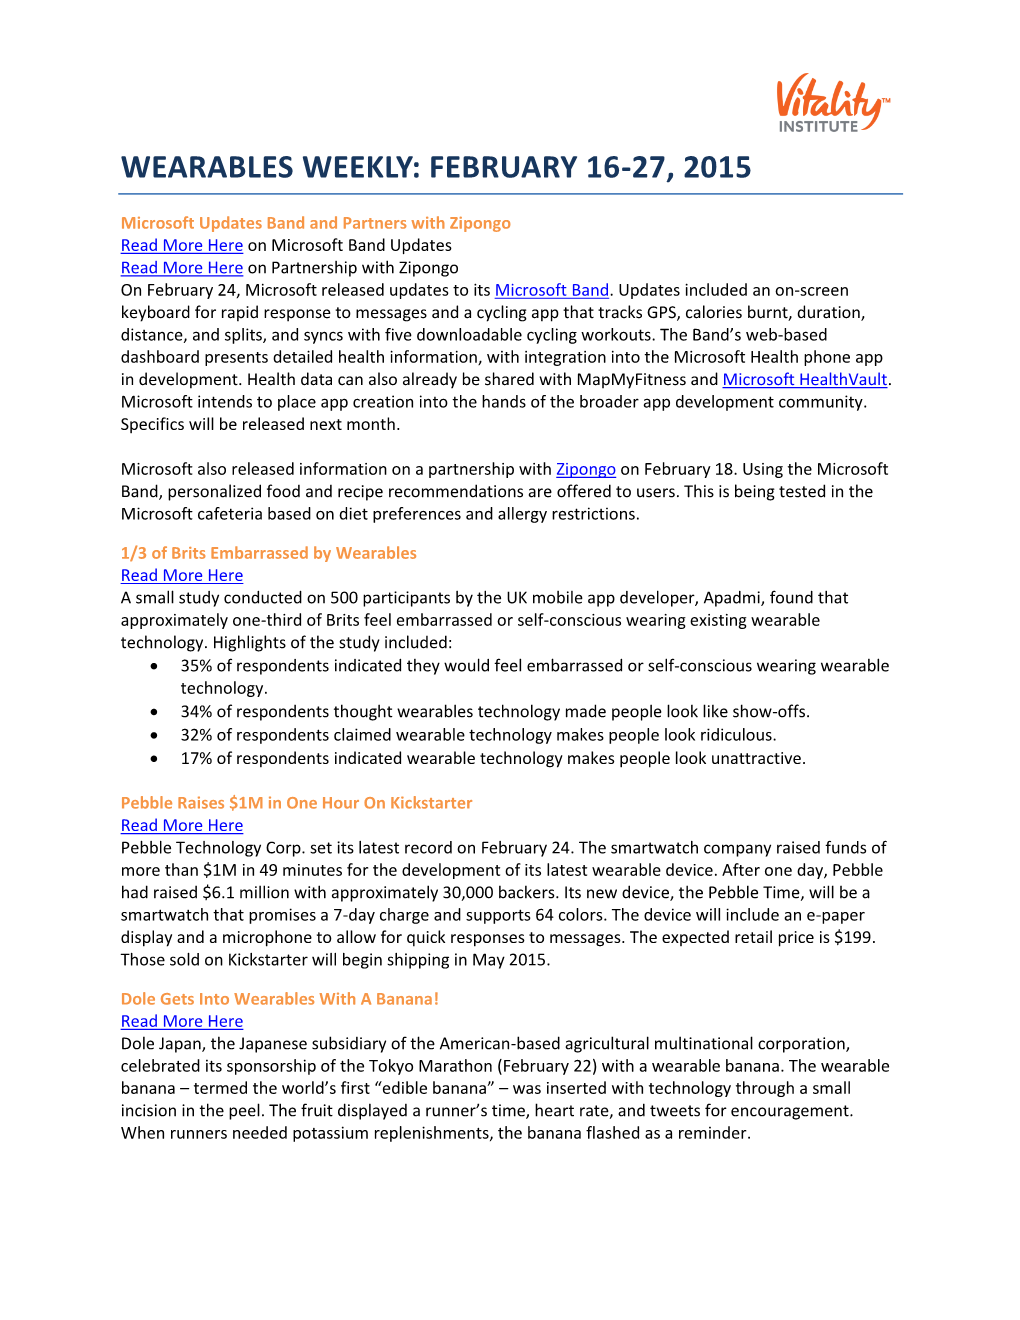 Wearables Weekly: February 16-27, 2015